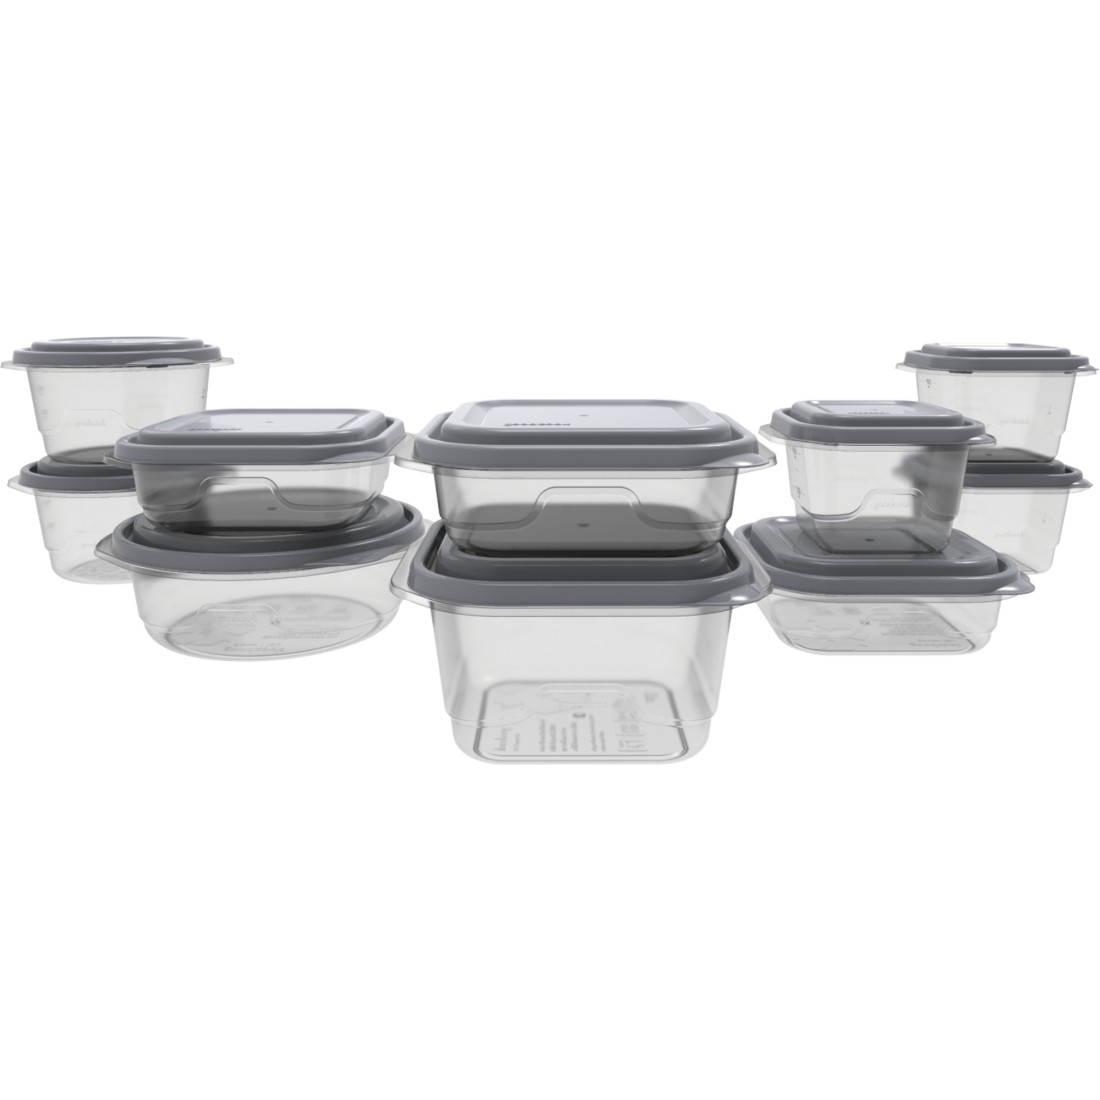 5 Best Tupperware Products You Need - Fit Men Cook